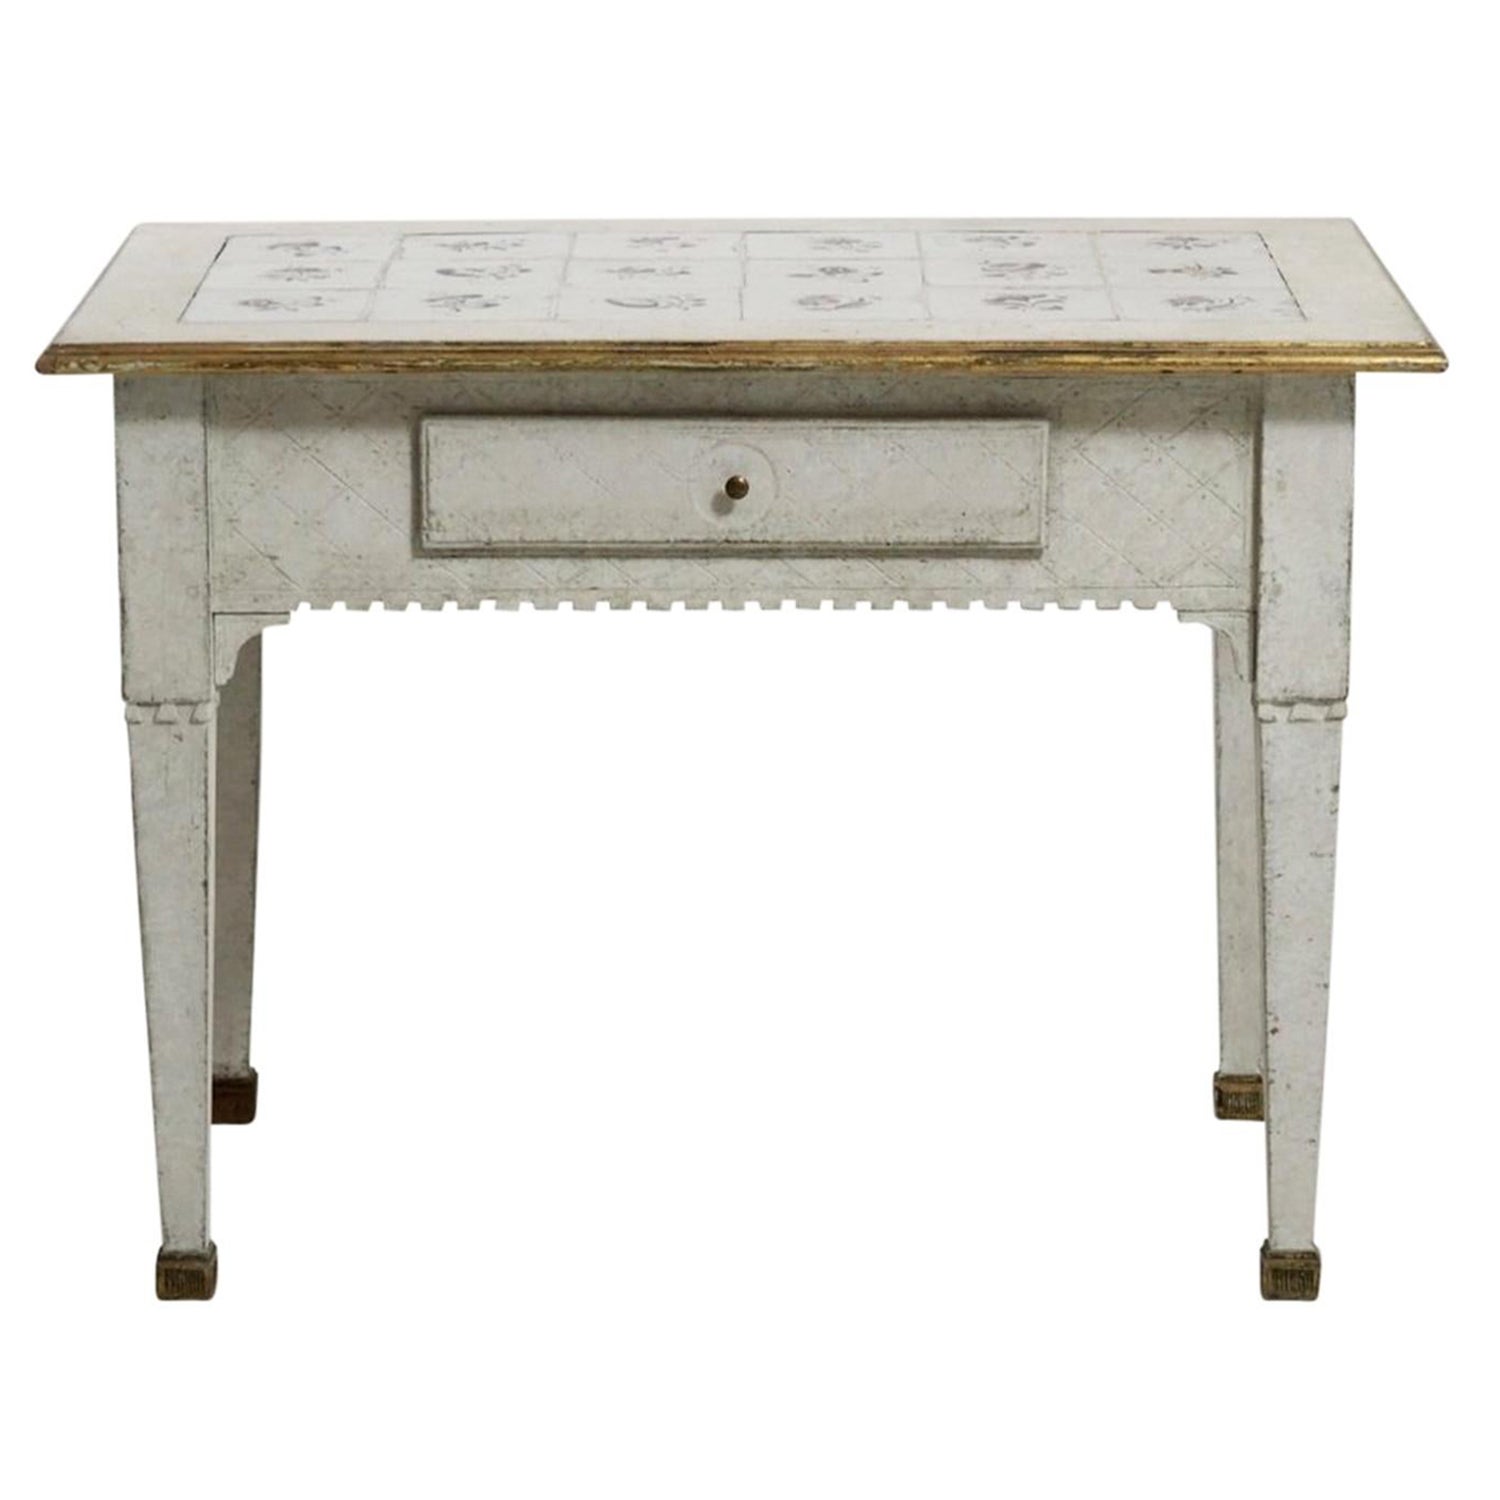 18th-19th Light-White Swedish Gustavian Tile Top Table, Small Pinewood Table